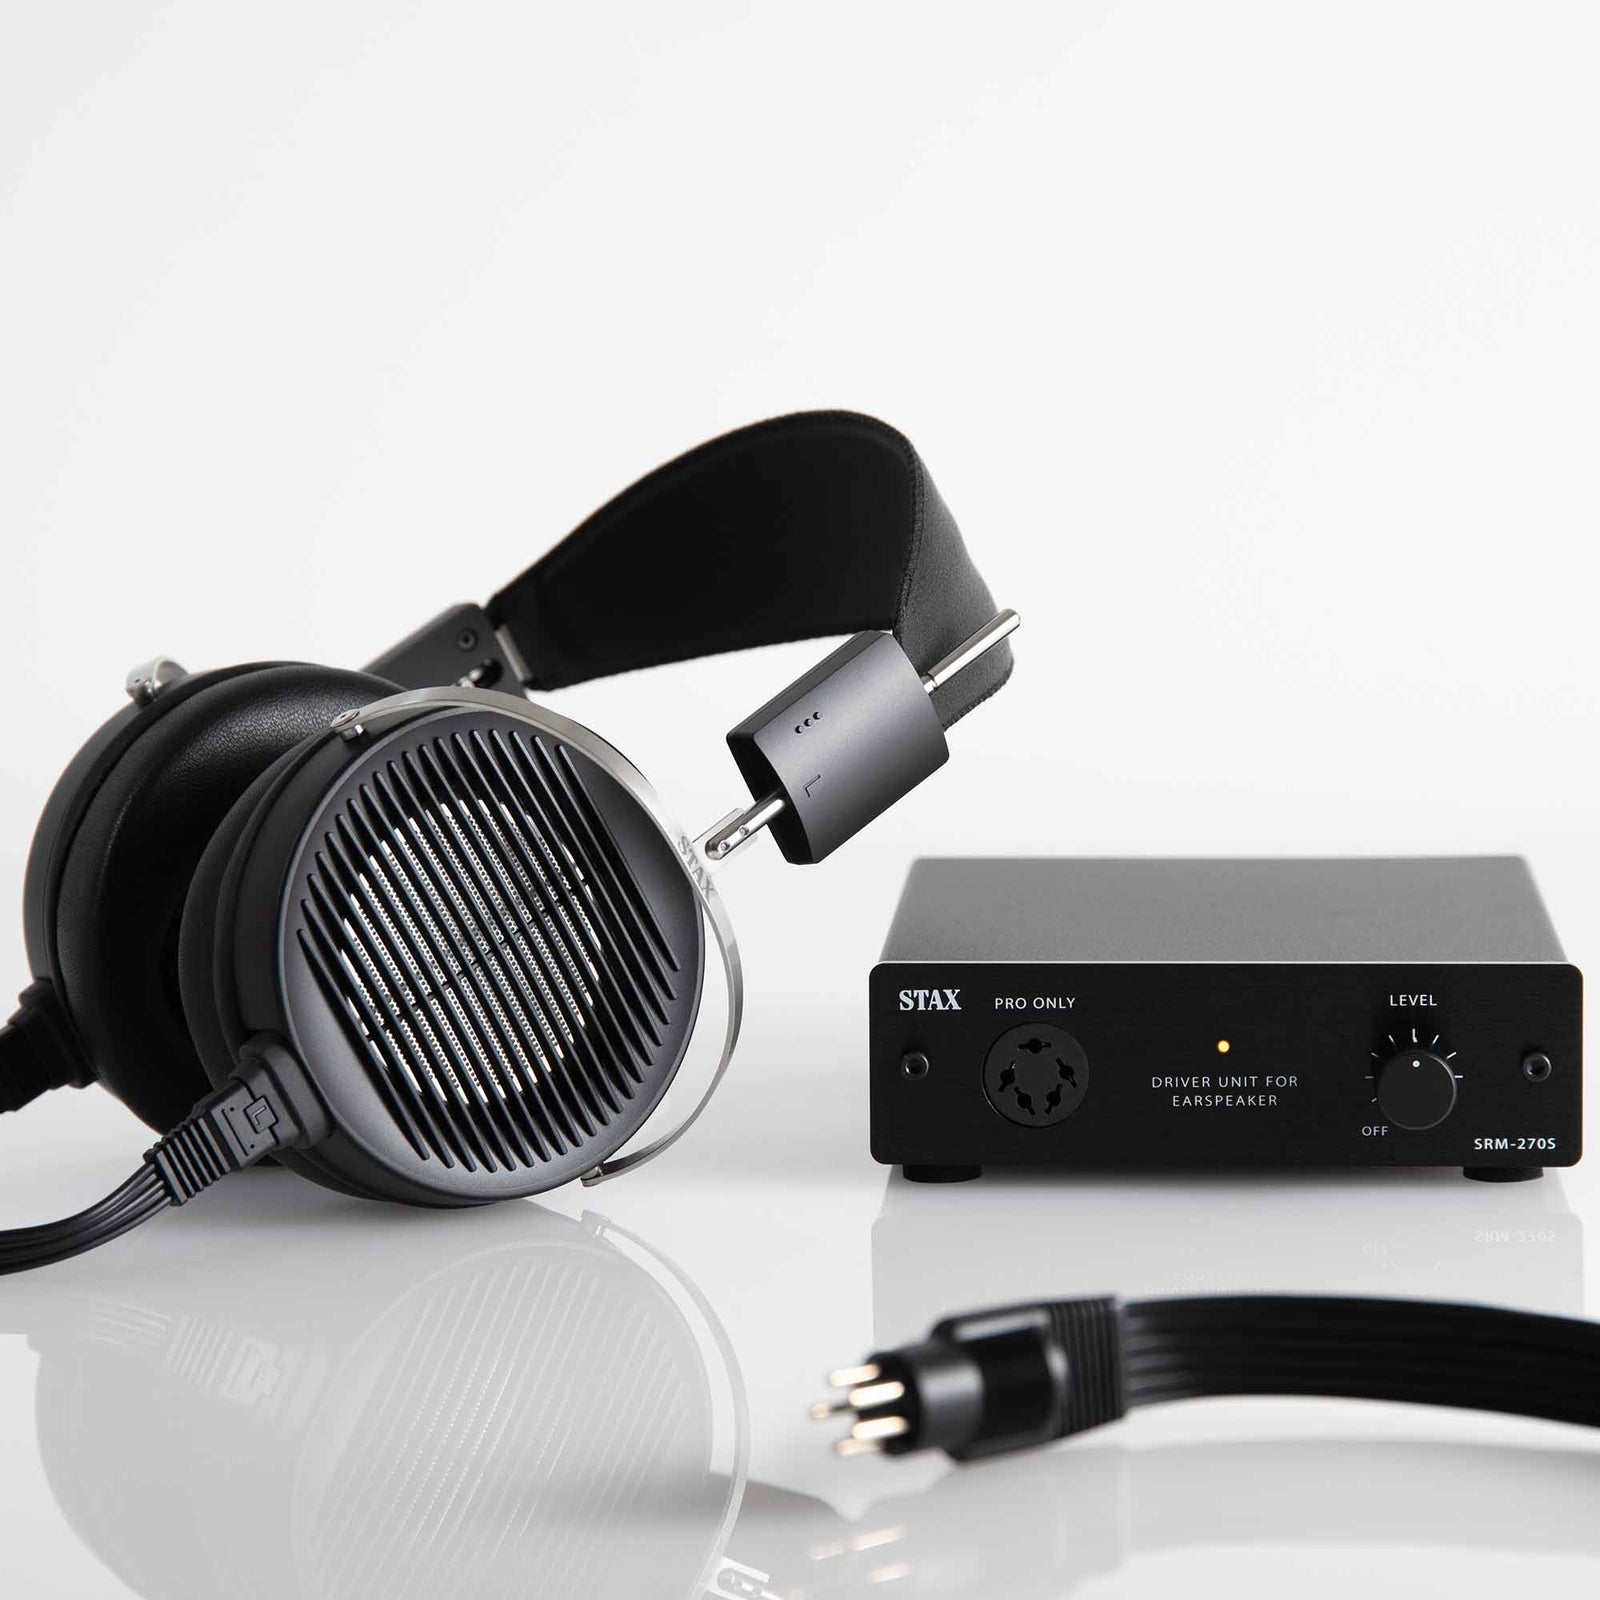 STAX | Electrostatic Headphones, Drivers, Accessories